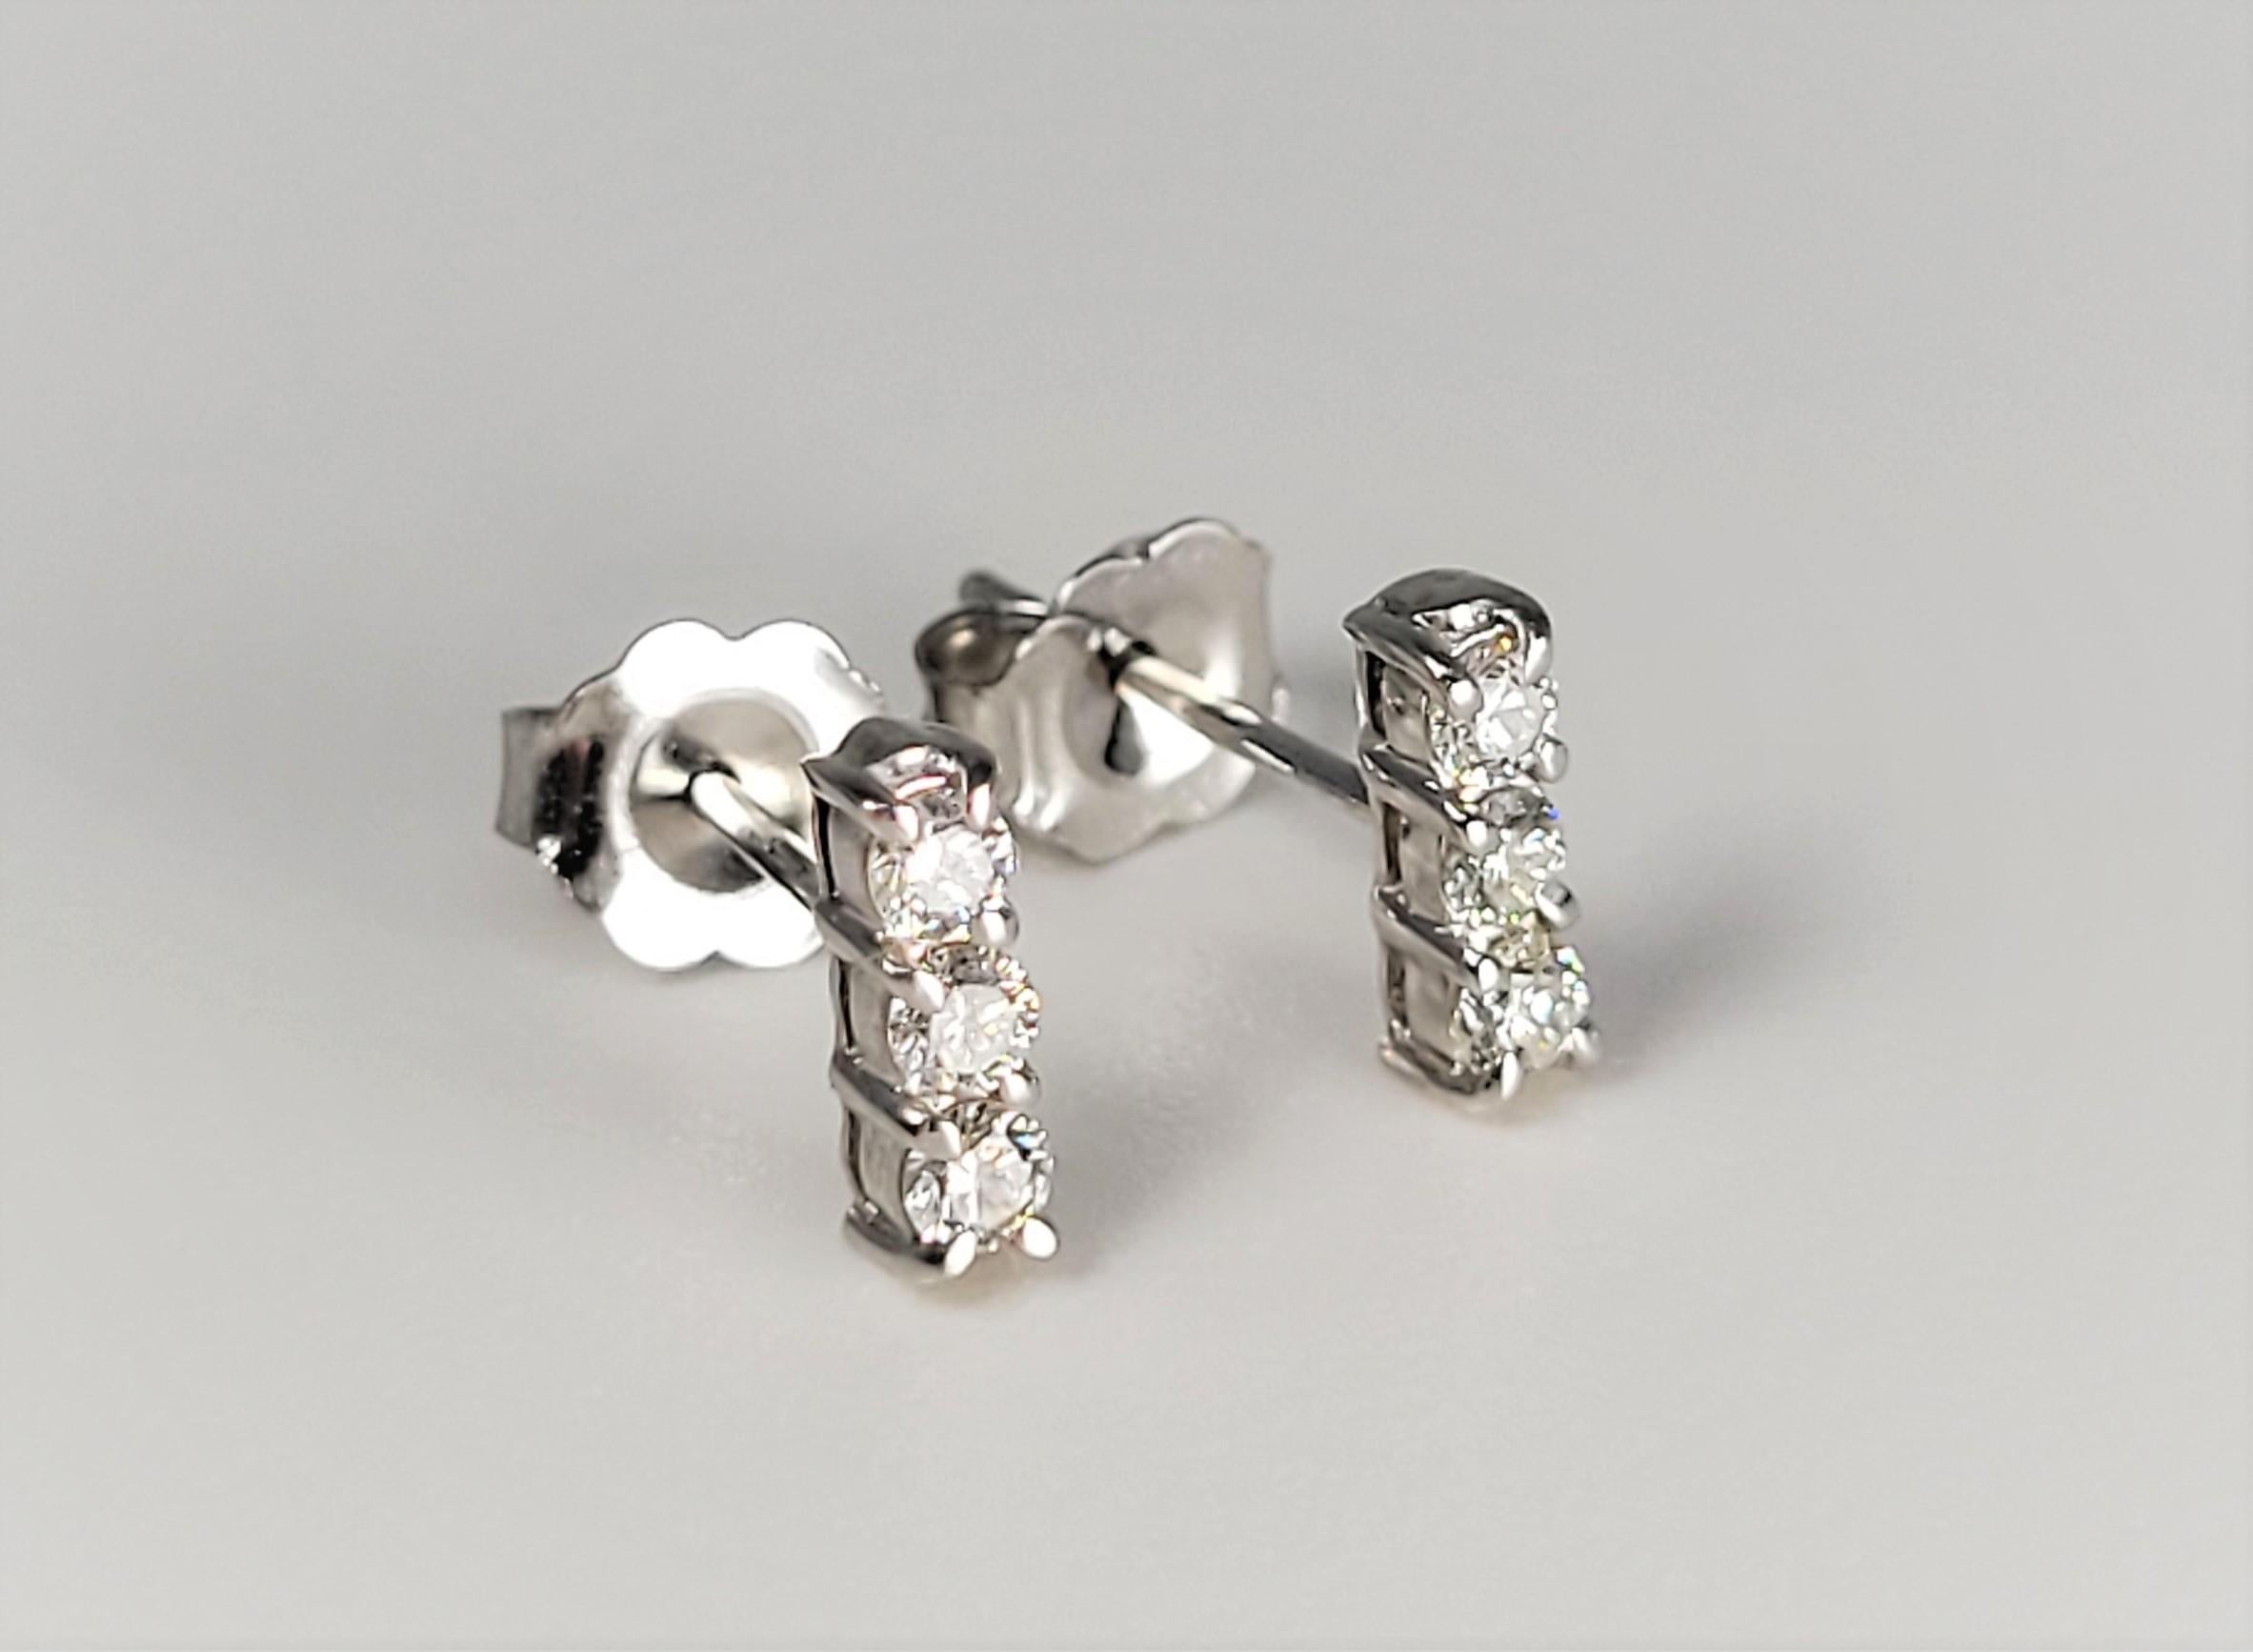 In a 3 diamond row, these sweet earrings are in 14 karat white gold and support a total of 0.24 carats. 